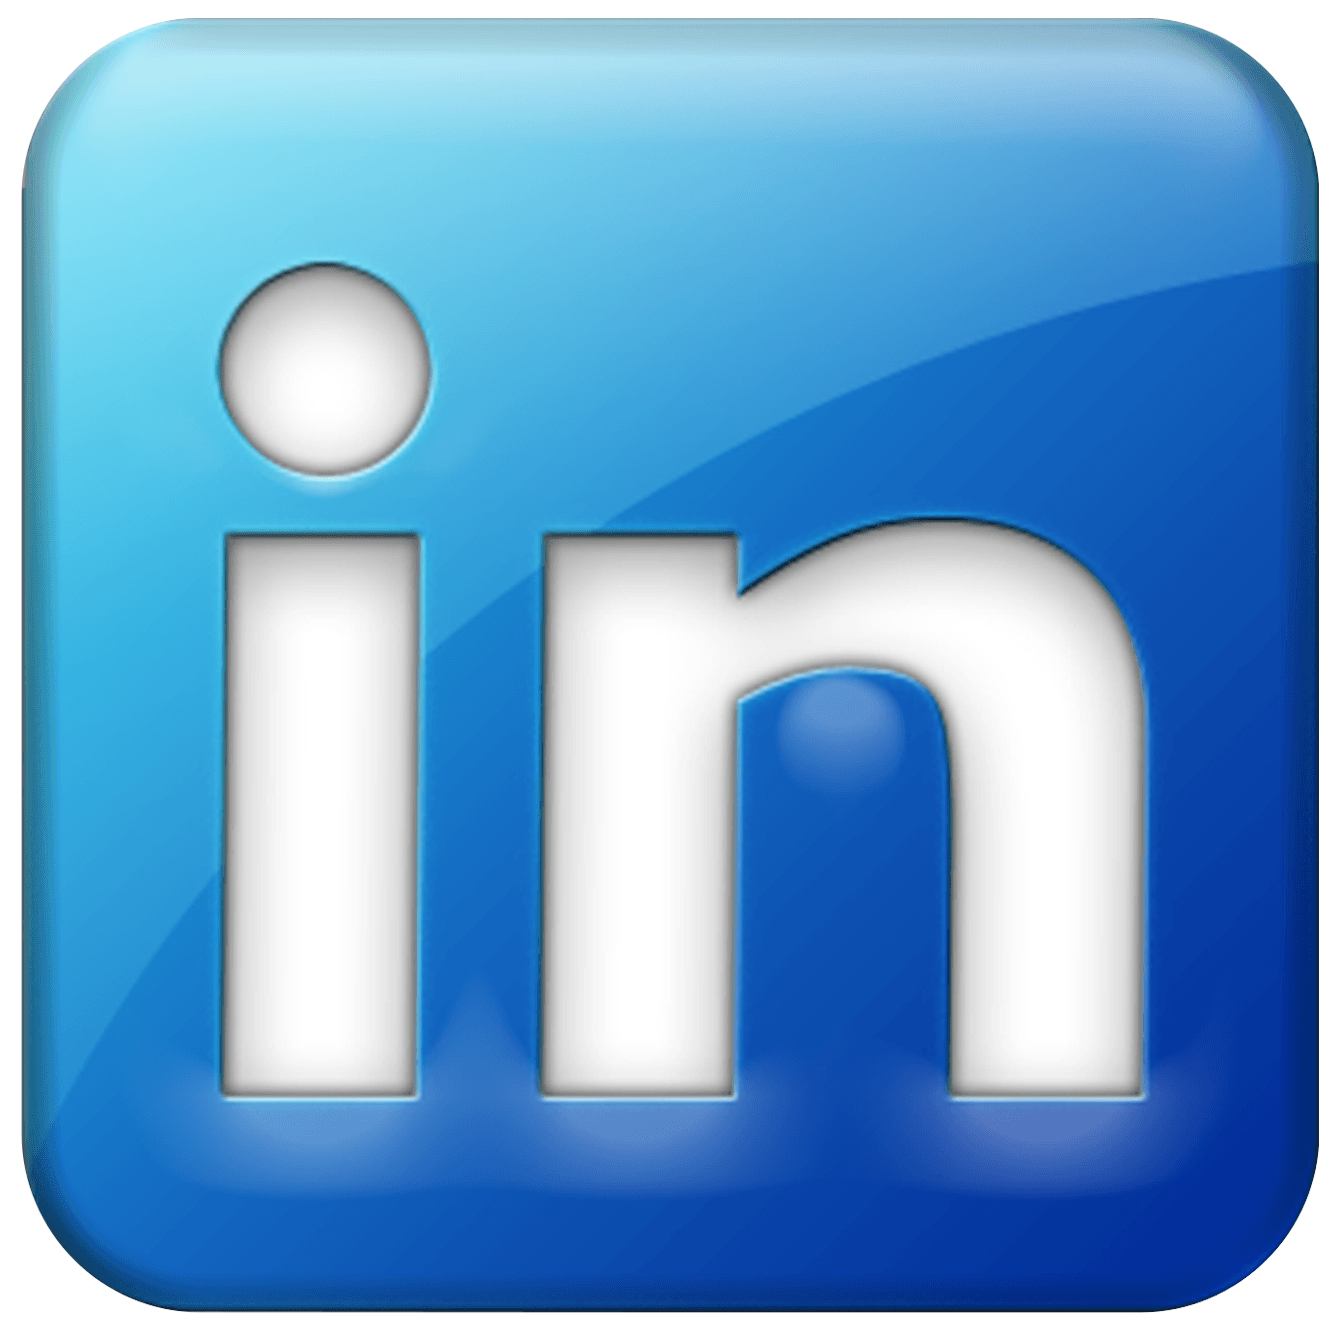 LinkedIn Box Logo - Linkedin Logo Transparent PNG Pictures - Free Icons and PNG Backgrounds